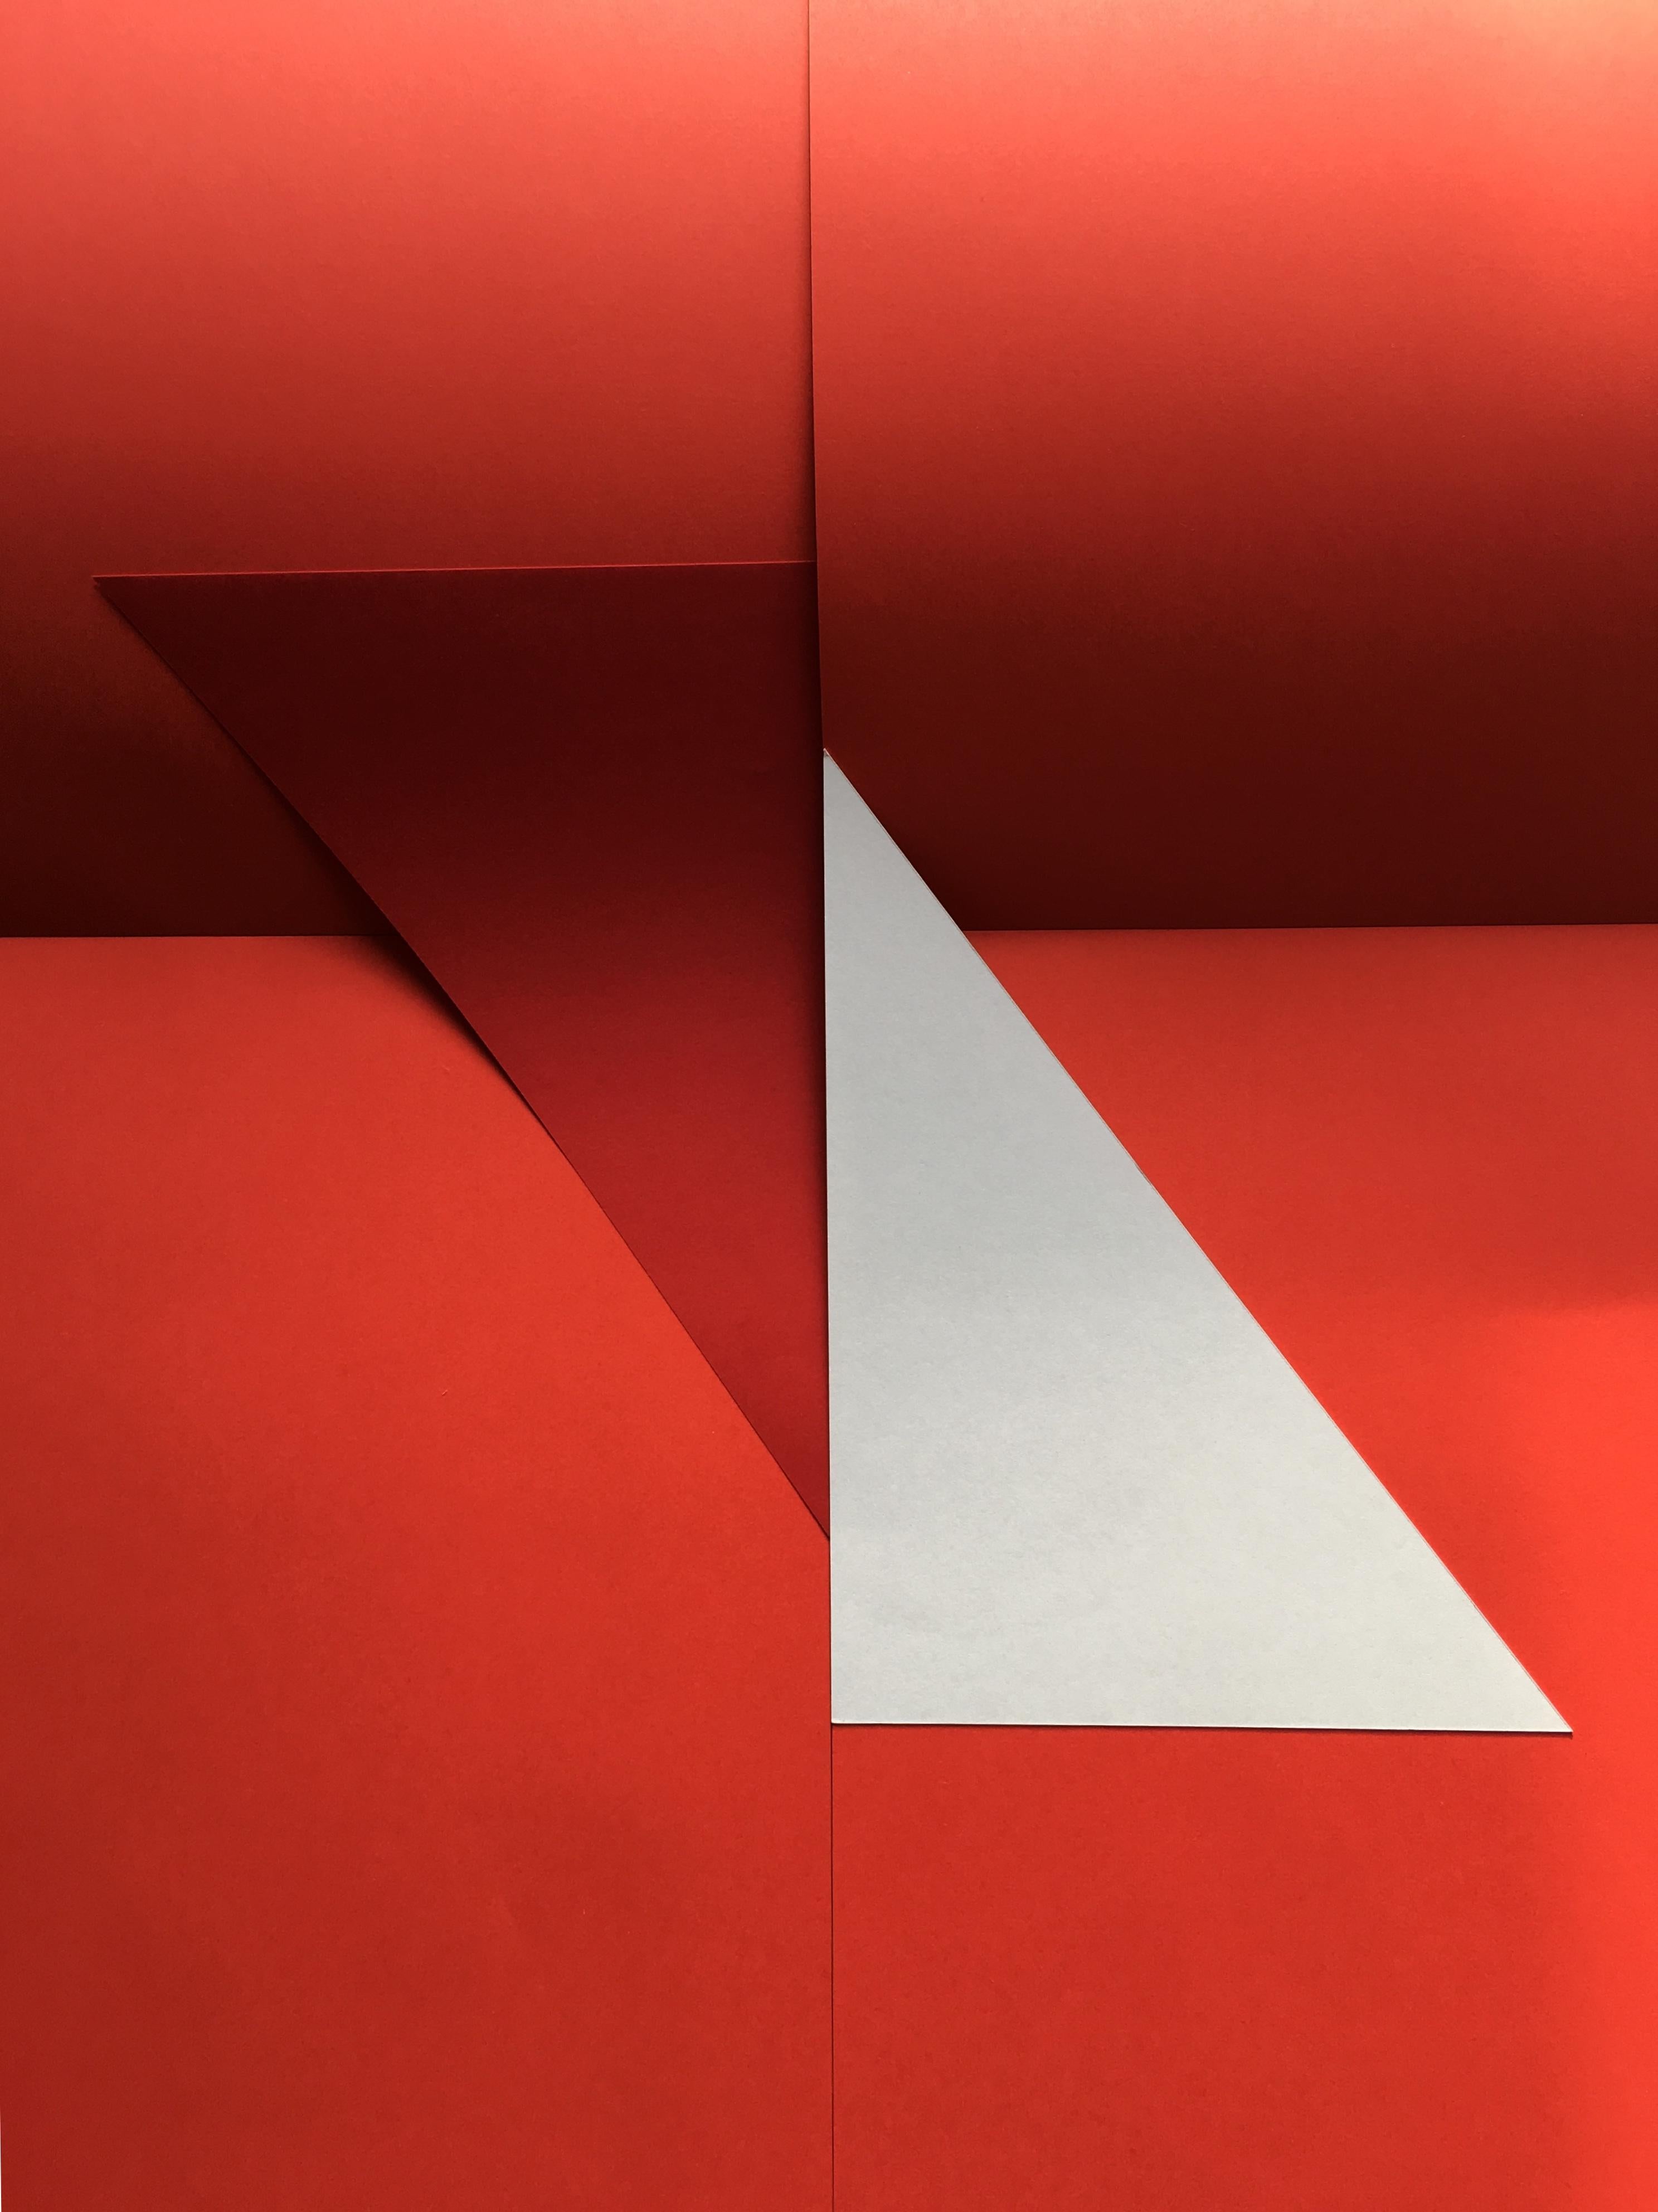 Abstraction, geometry, red, white, Signals#6